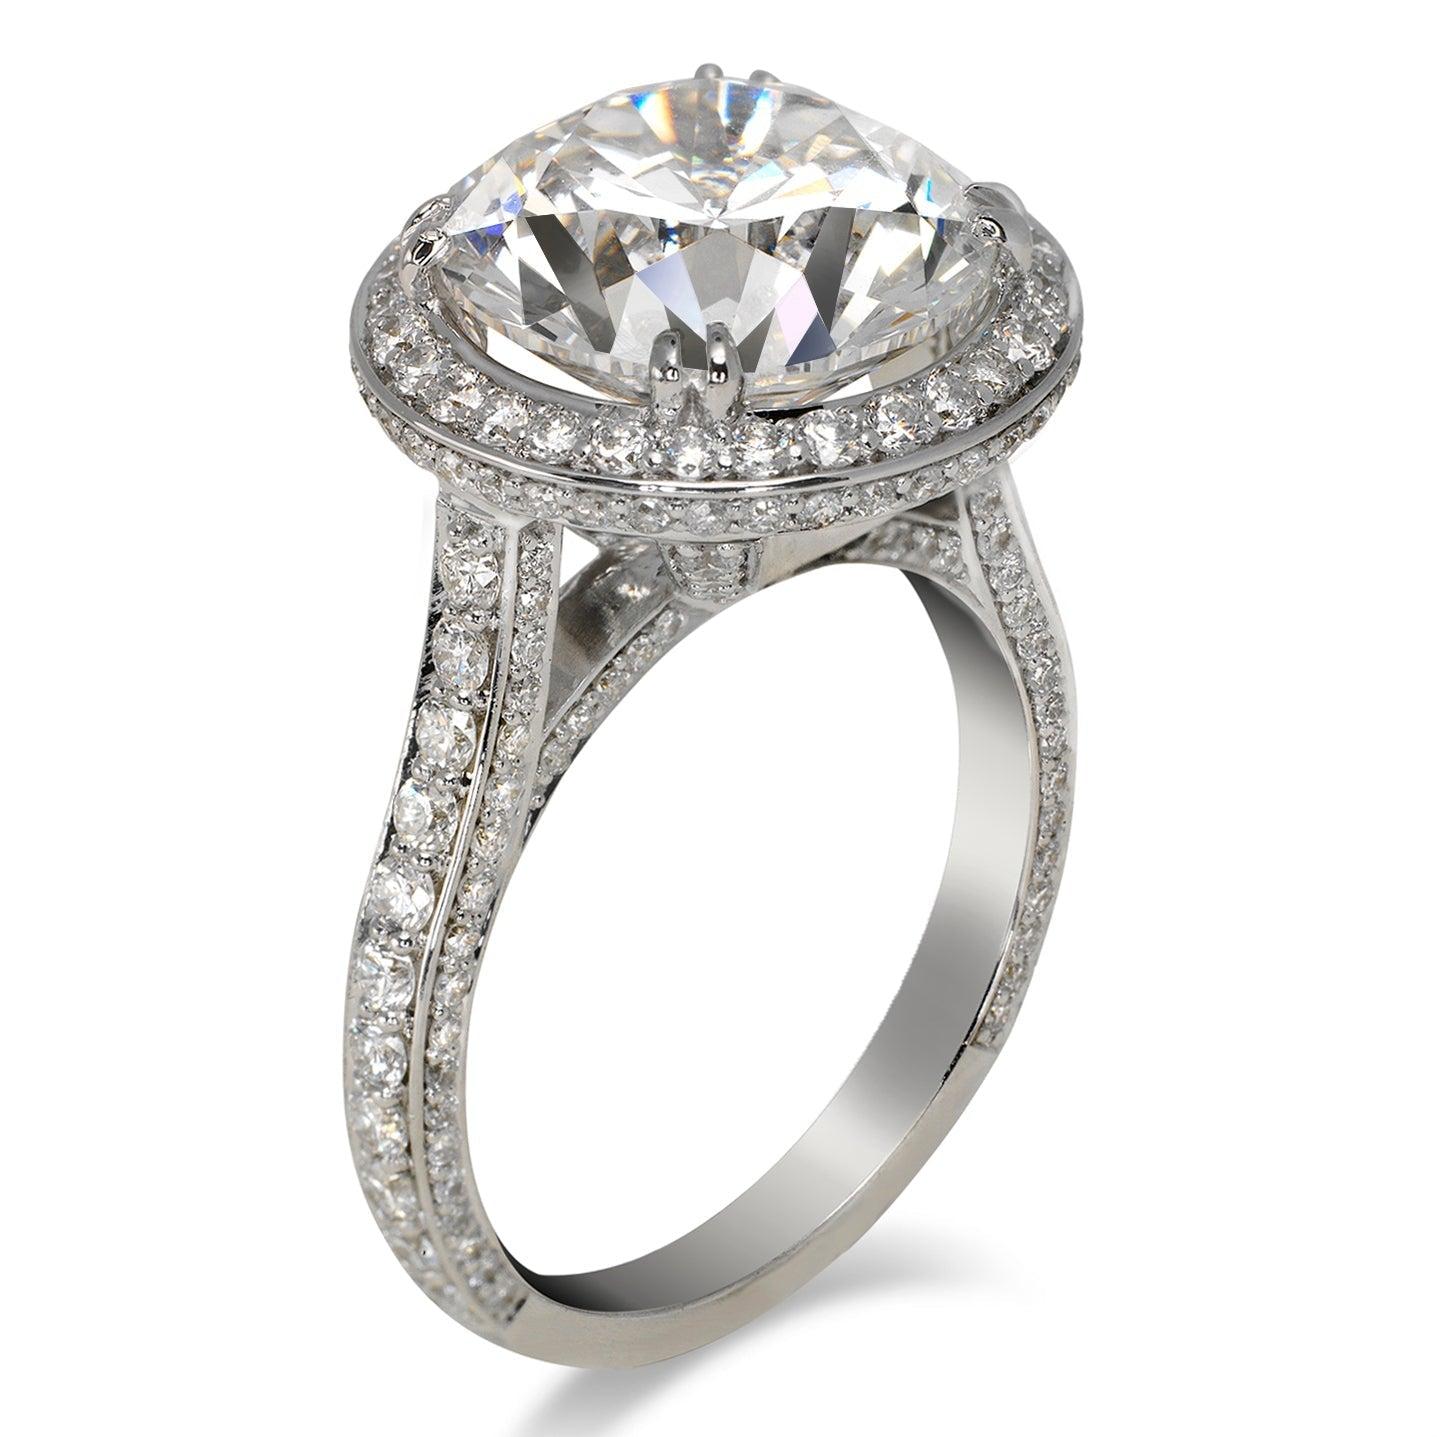 7 Carat Round Cut Diamond Engagement Ring GIA Certified F VVS2 In New Condition For Sale In New York, NY